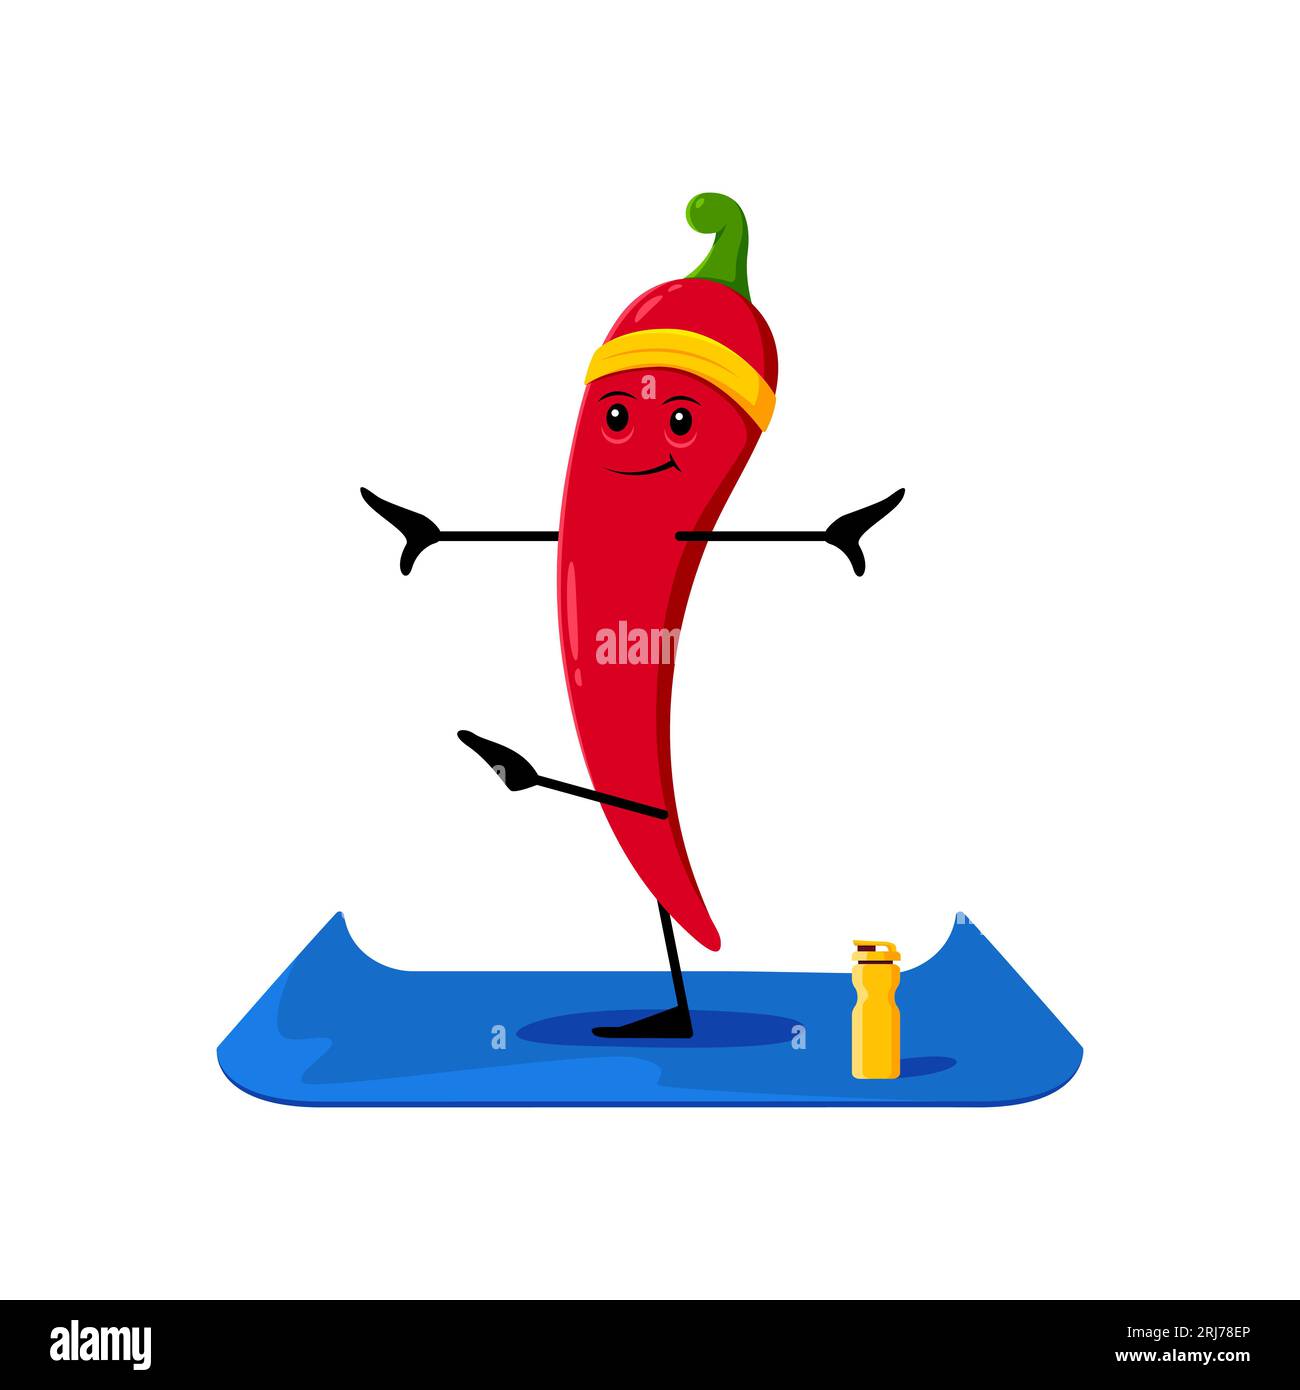 Cartoon Tex Mex Mexican food chili character on yoga fitness. Mexican cuisine fastfood hot spice funny mascot, red chili pepper isolated vector comical personage doing fitness or yoga exercises Stock Vector